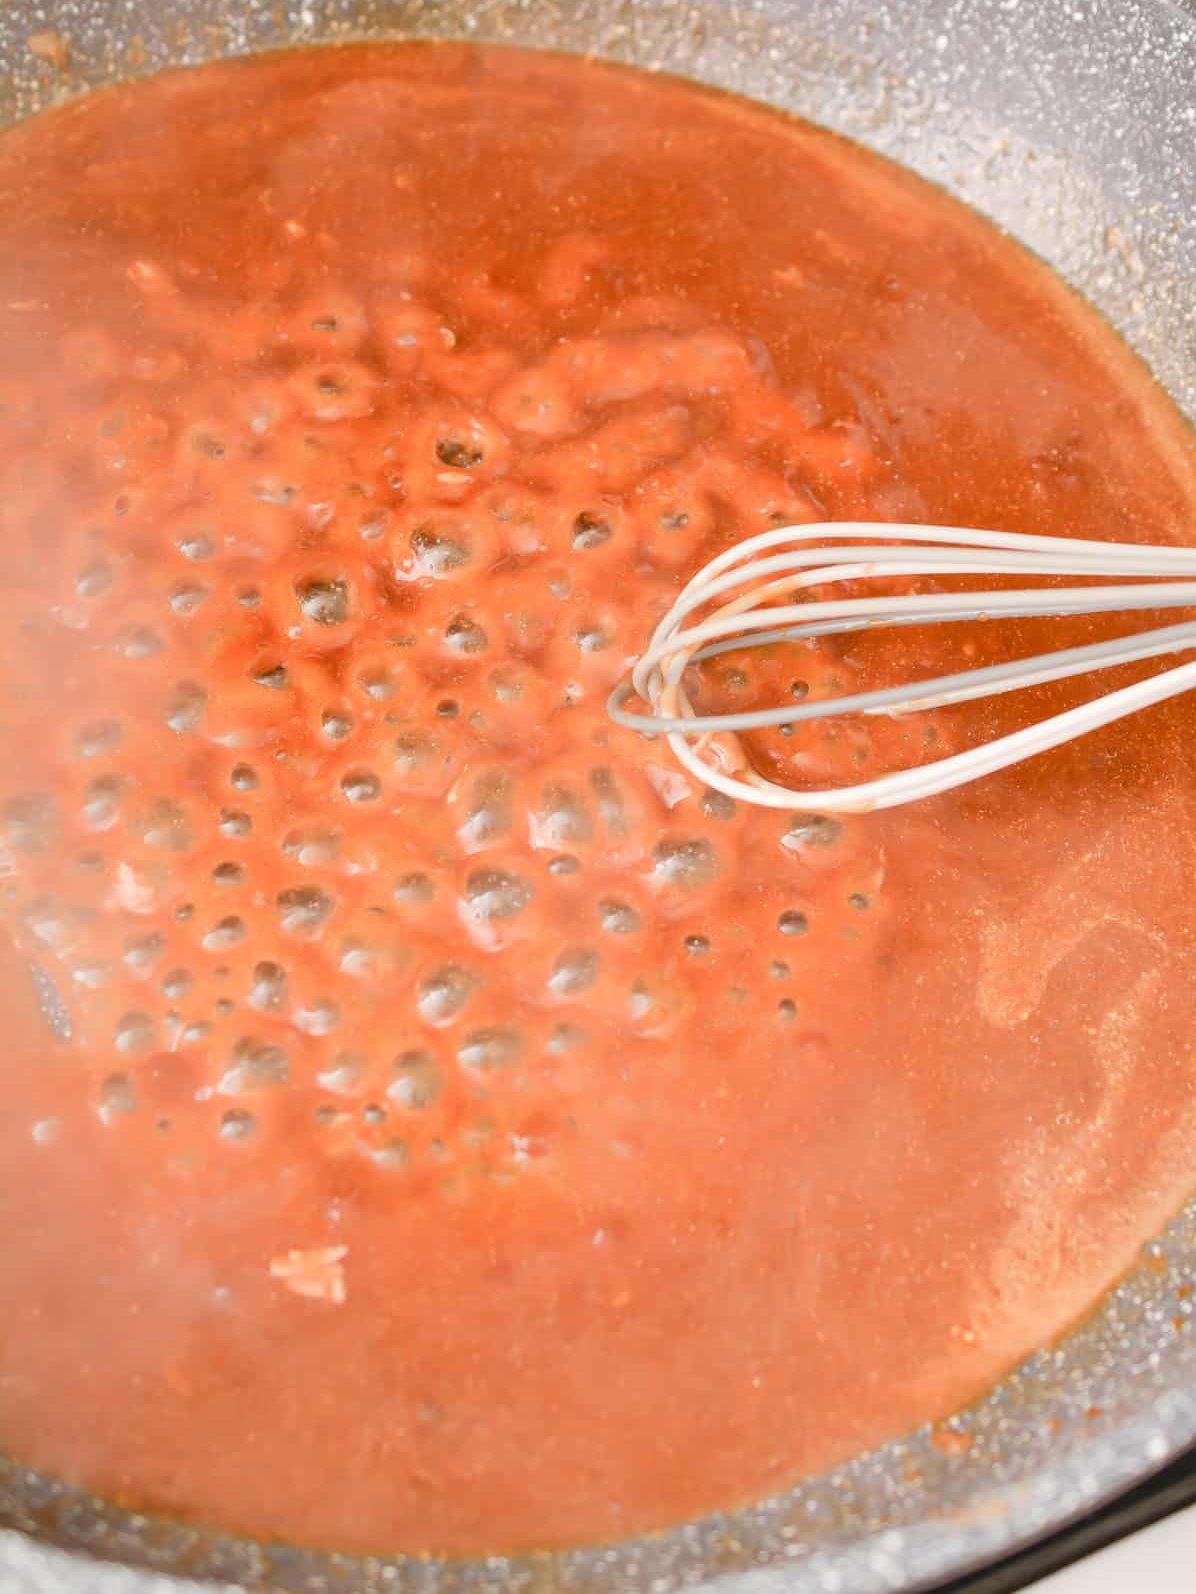 Mix the gravy packet with the water, and start cooking in a skillet over medium-low heat.